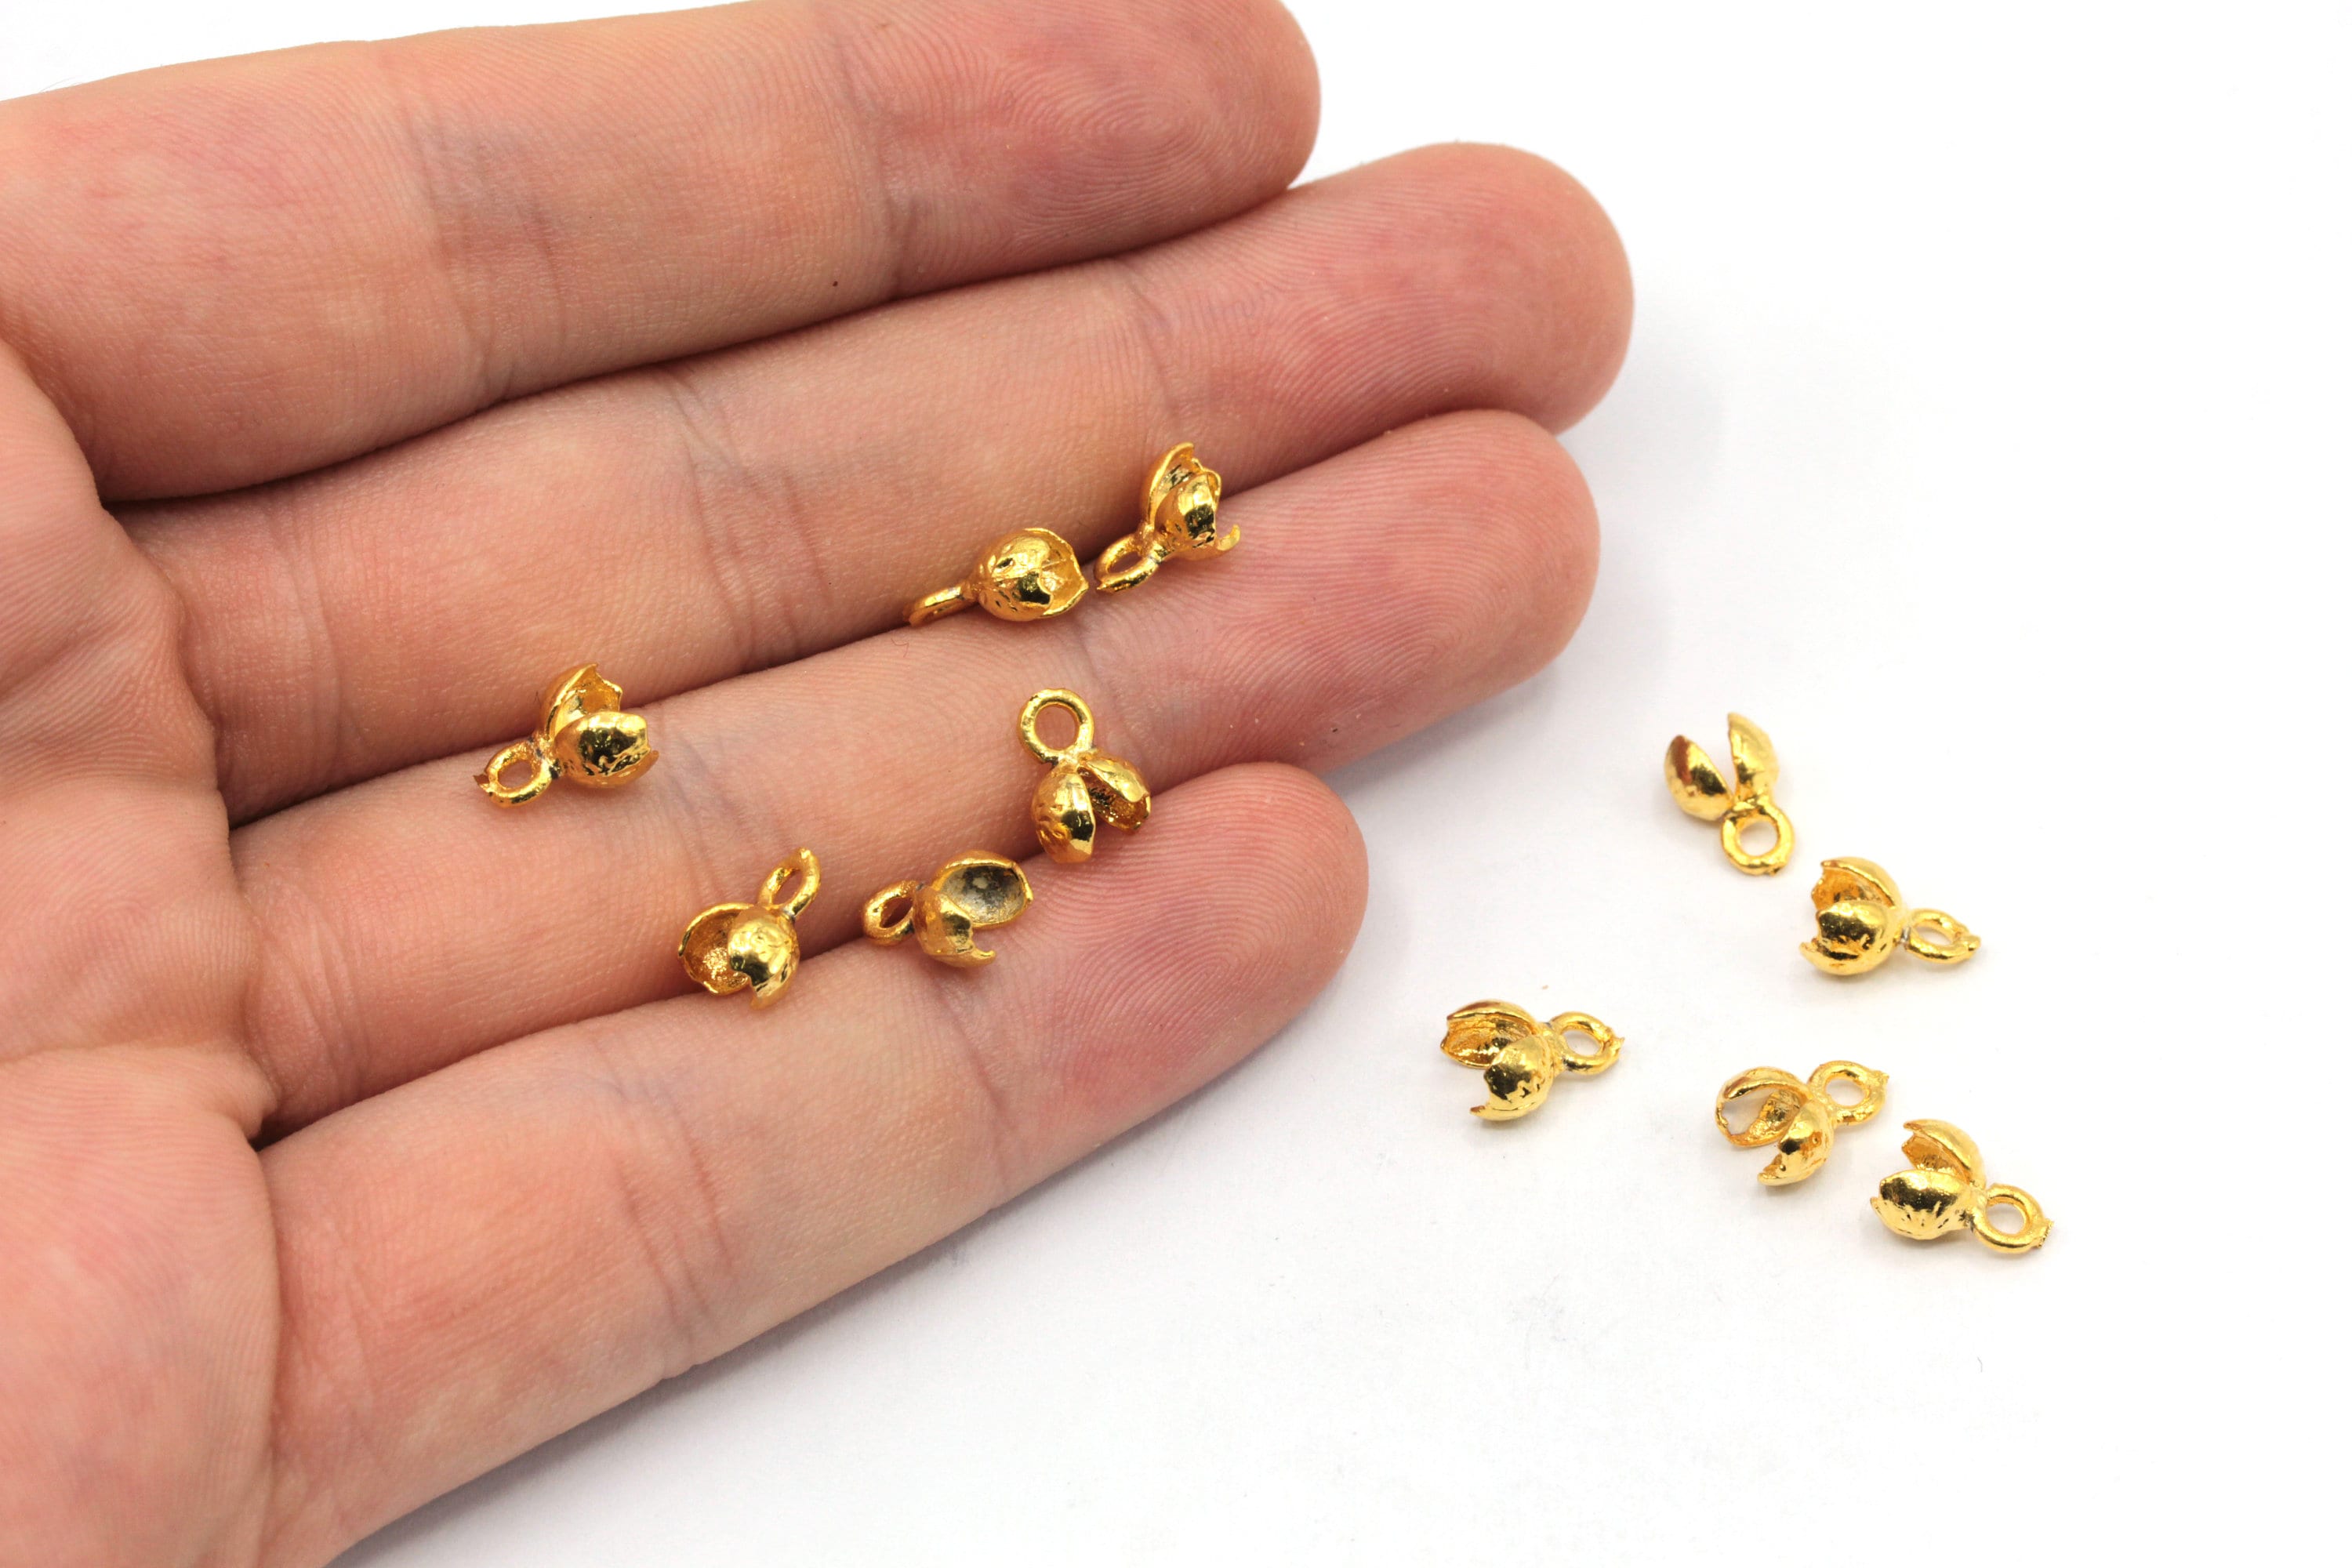 Gold Insert Ring Spacer Beads, 20 pcs Saturn Jump Ring For Beads